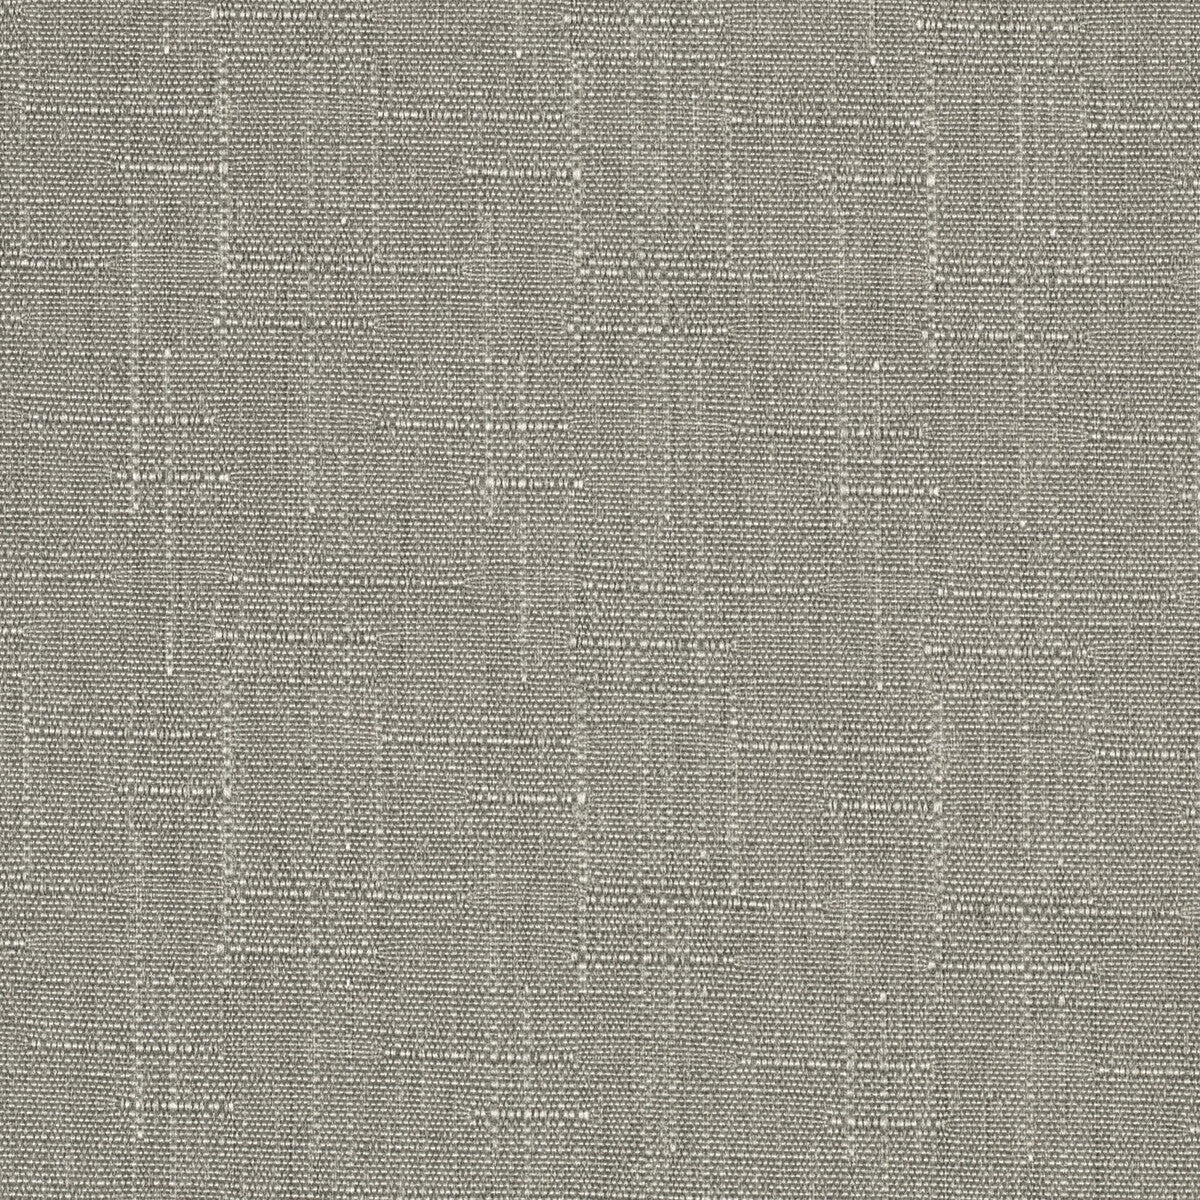 Kravet Contract fabric in 4321-11 color - pattern 4321.11.0 - by Kravet Contract